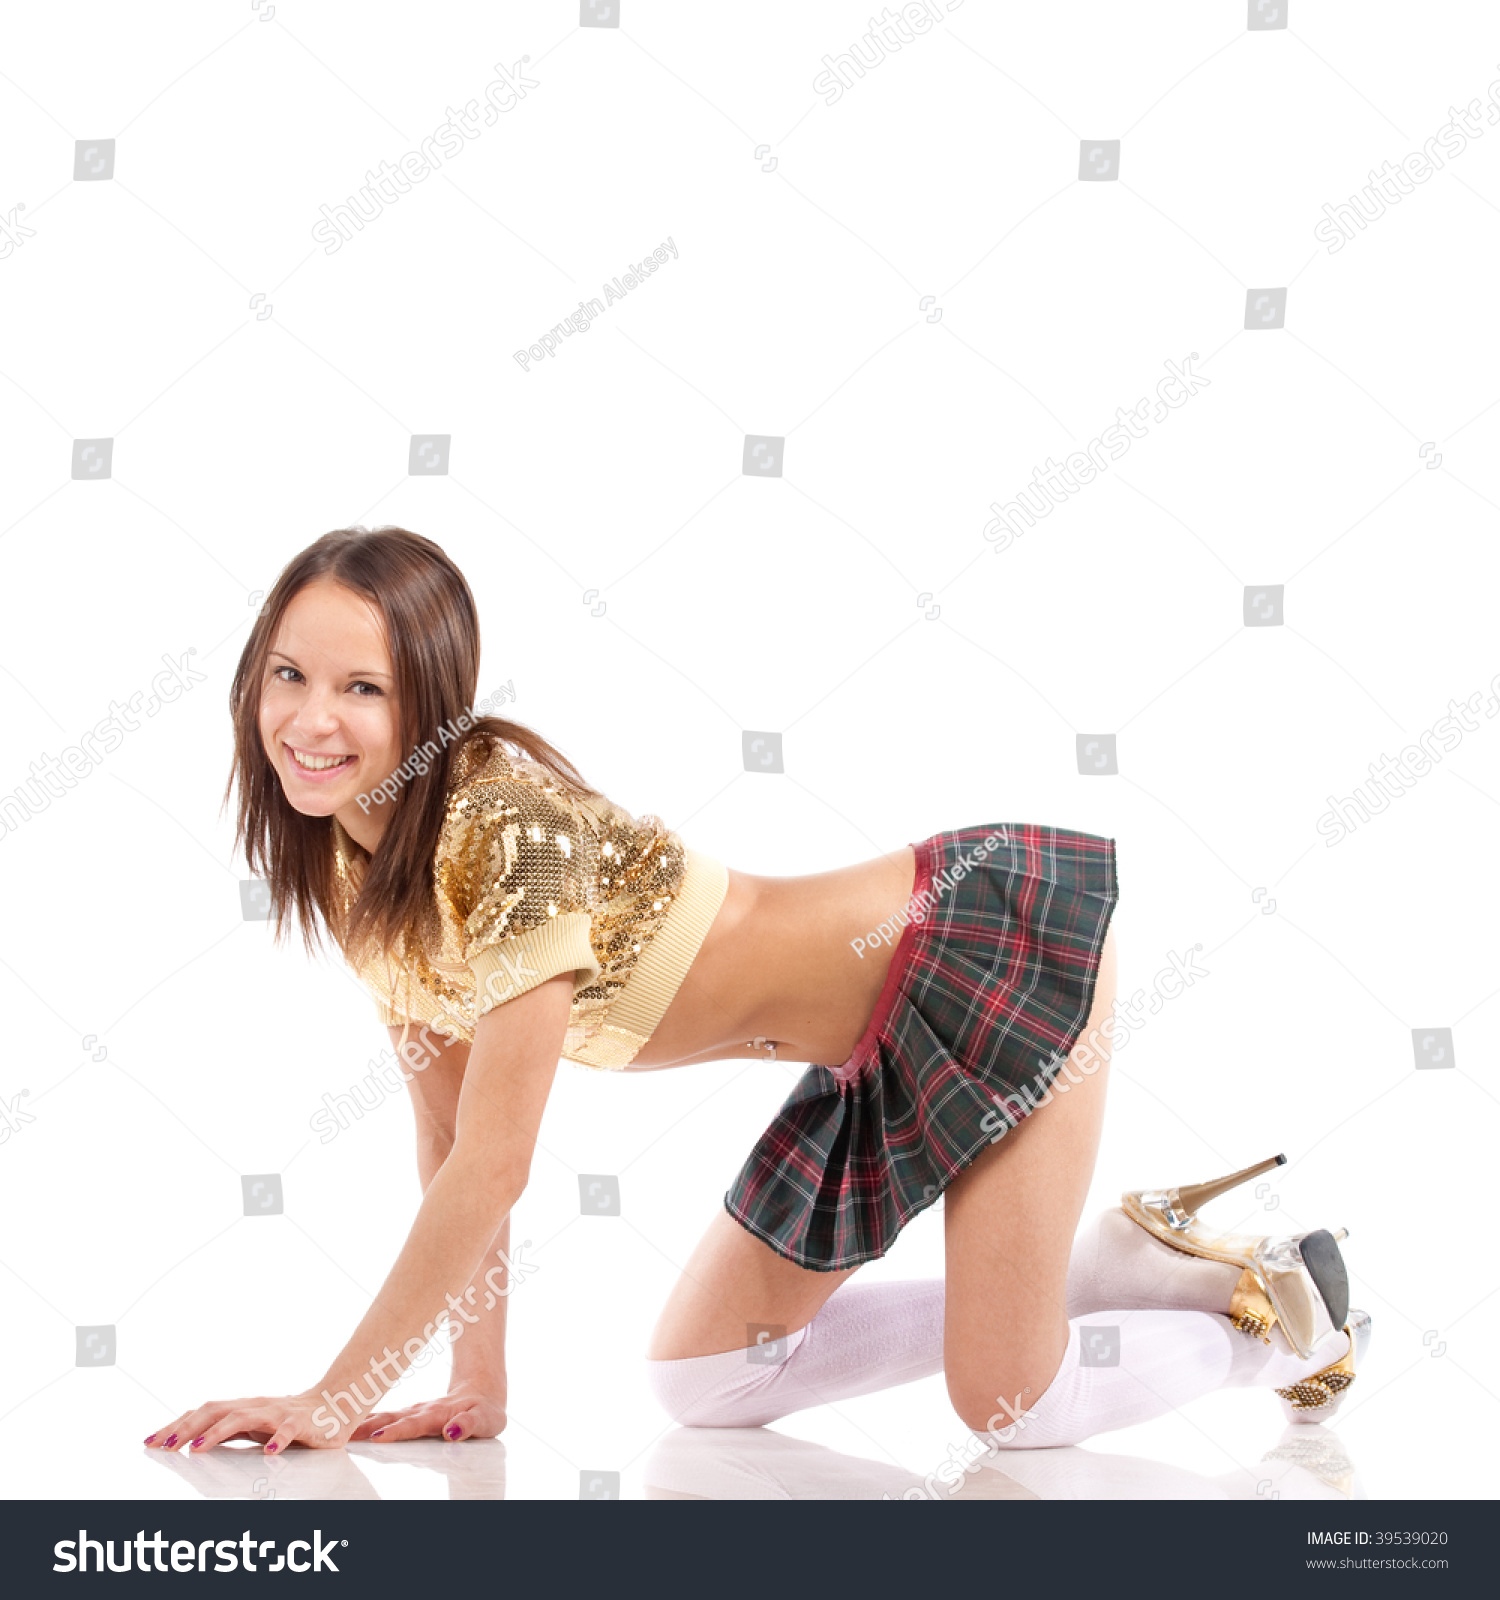 Sexy Woman Posing On Her Knees Isolated Over White Background Stock Photo Shutterstock